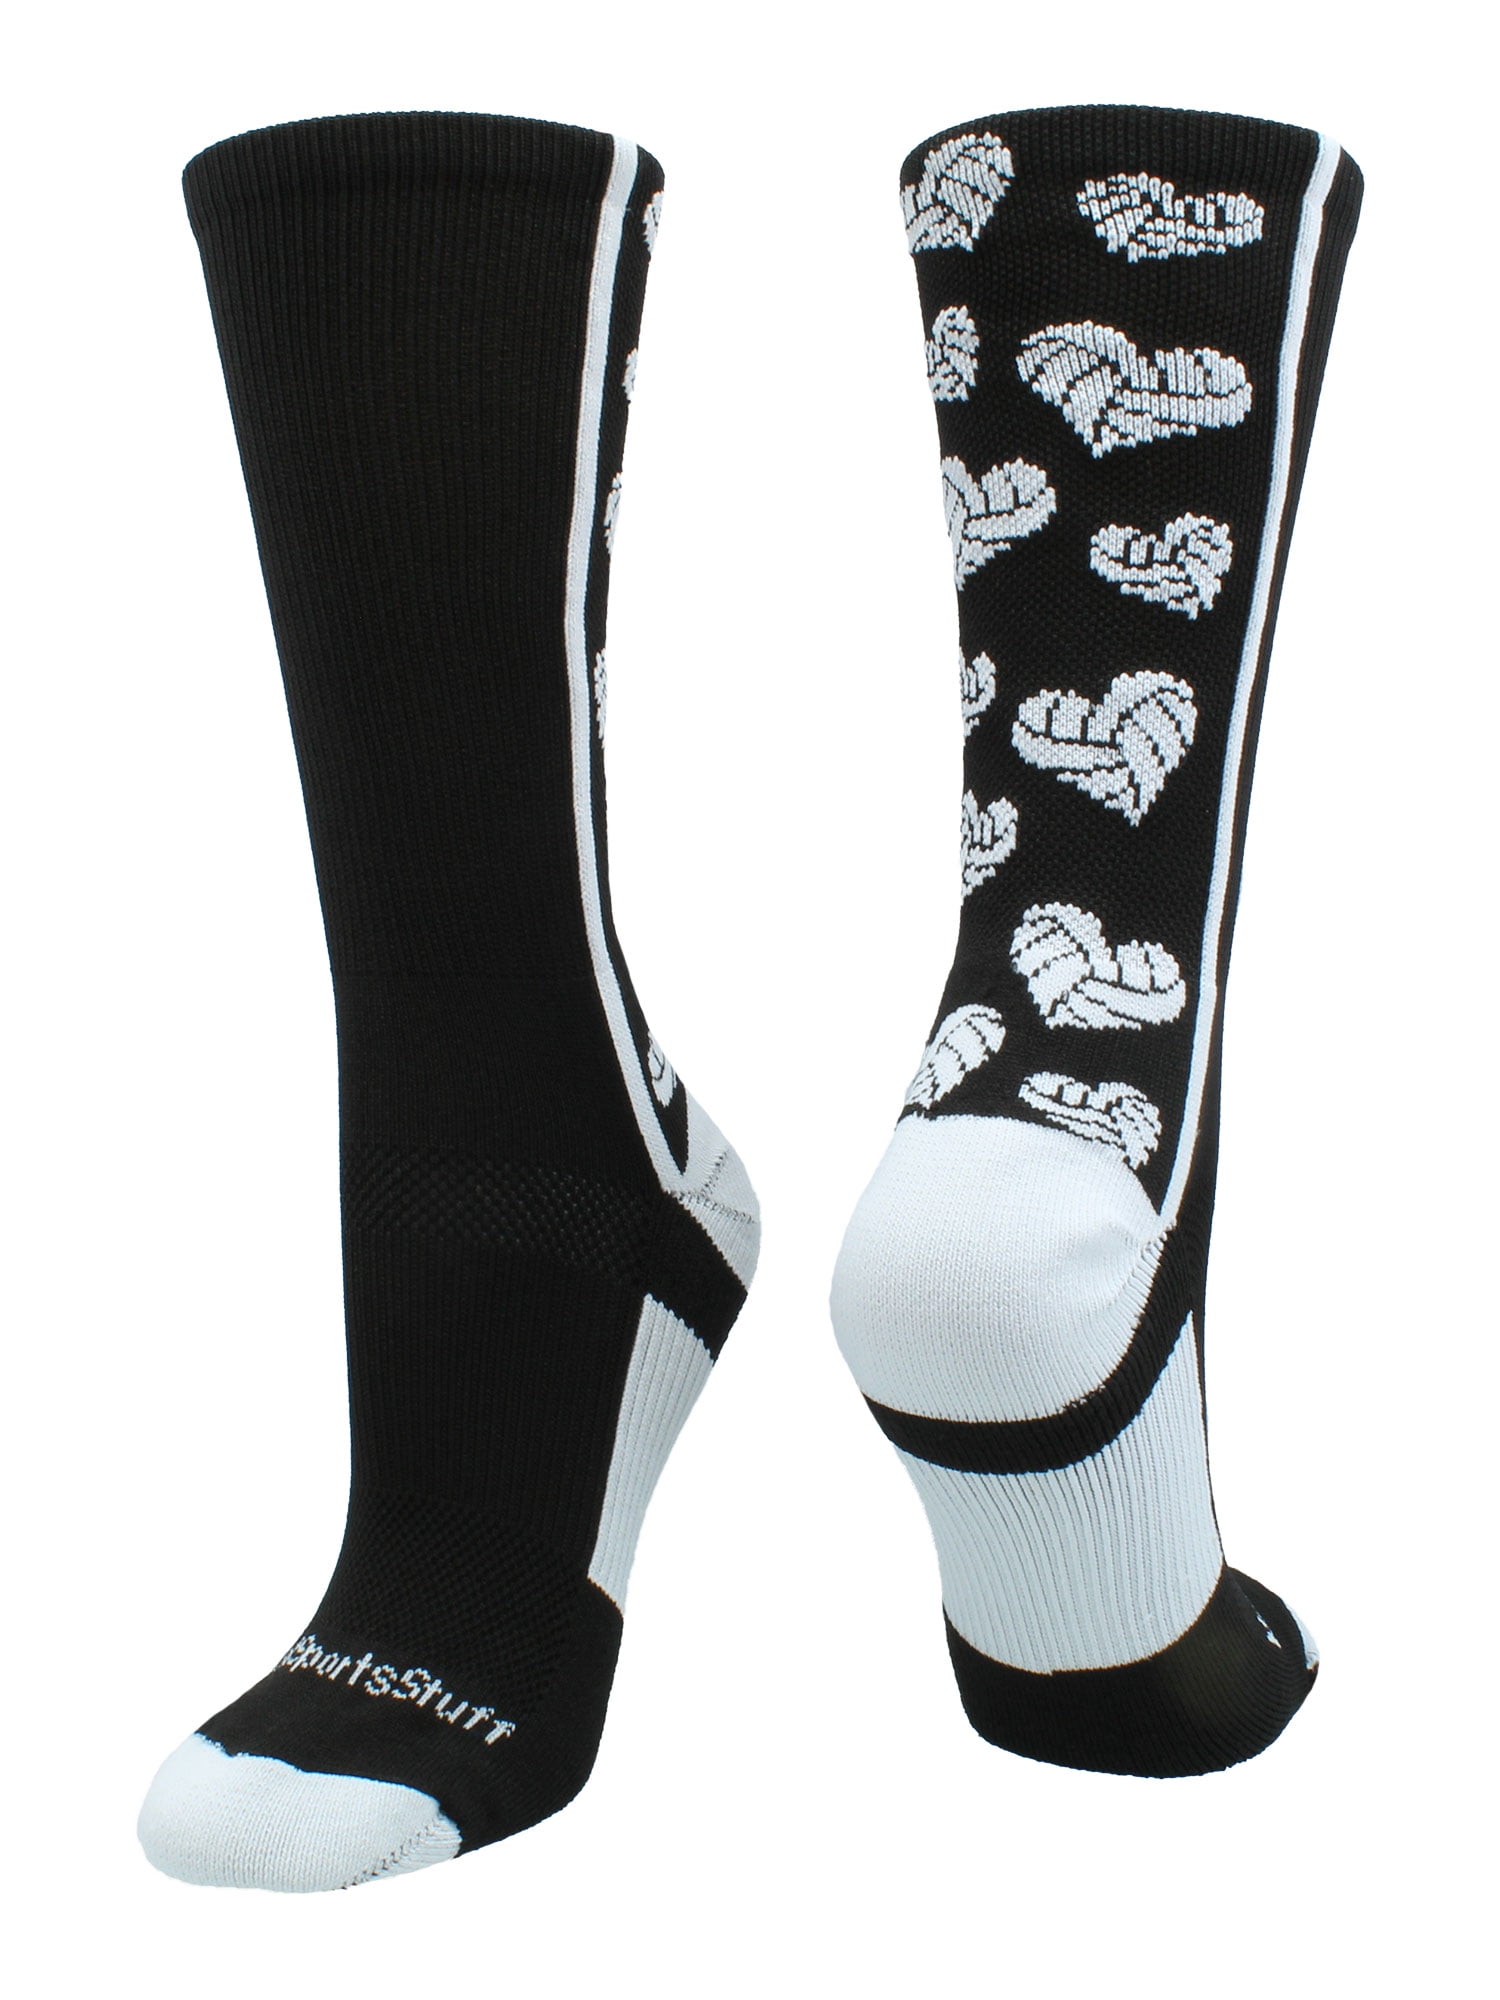 Hejse Scully sød smag Crazy Love Volleyball Hearts Crew Socks (Black/White, Large) - Walmart.com